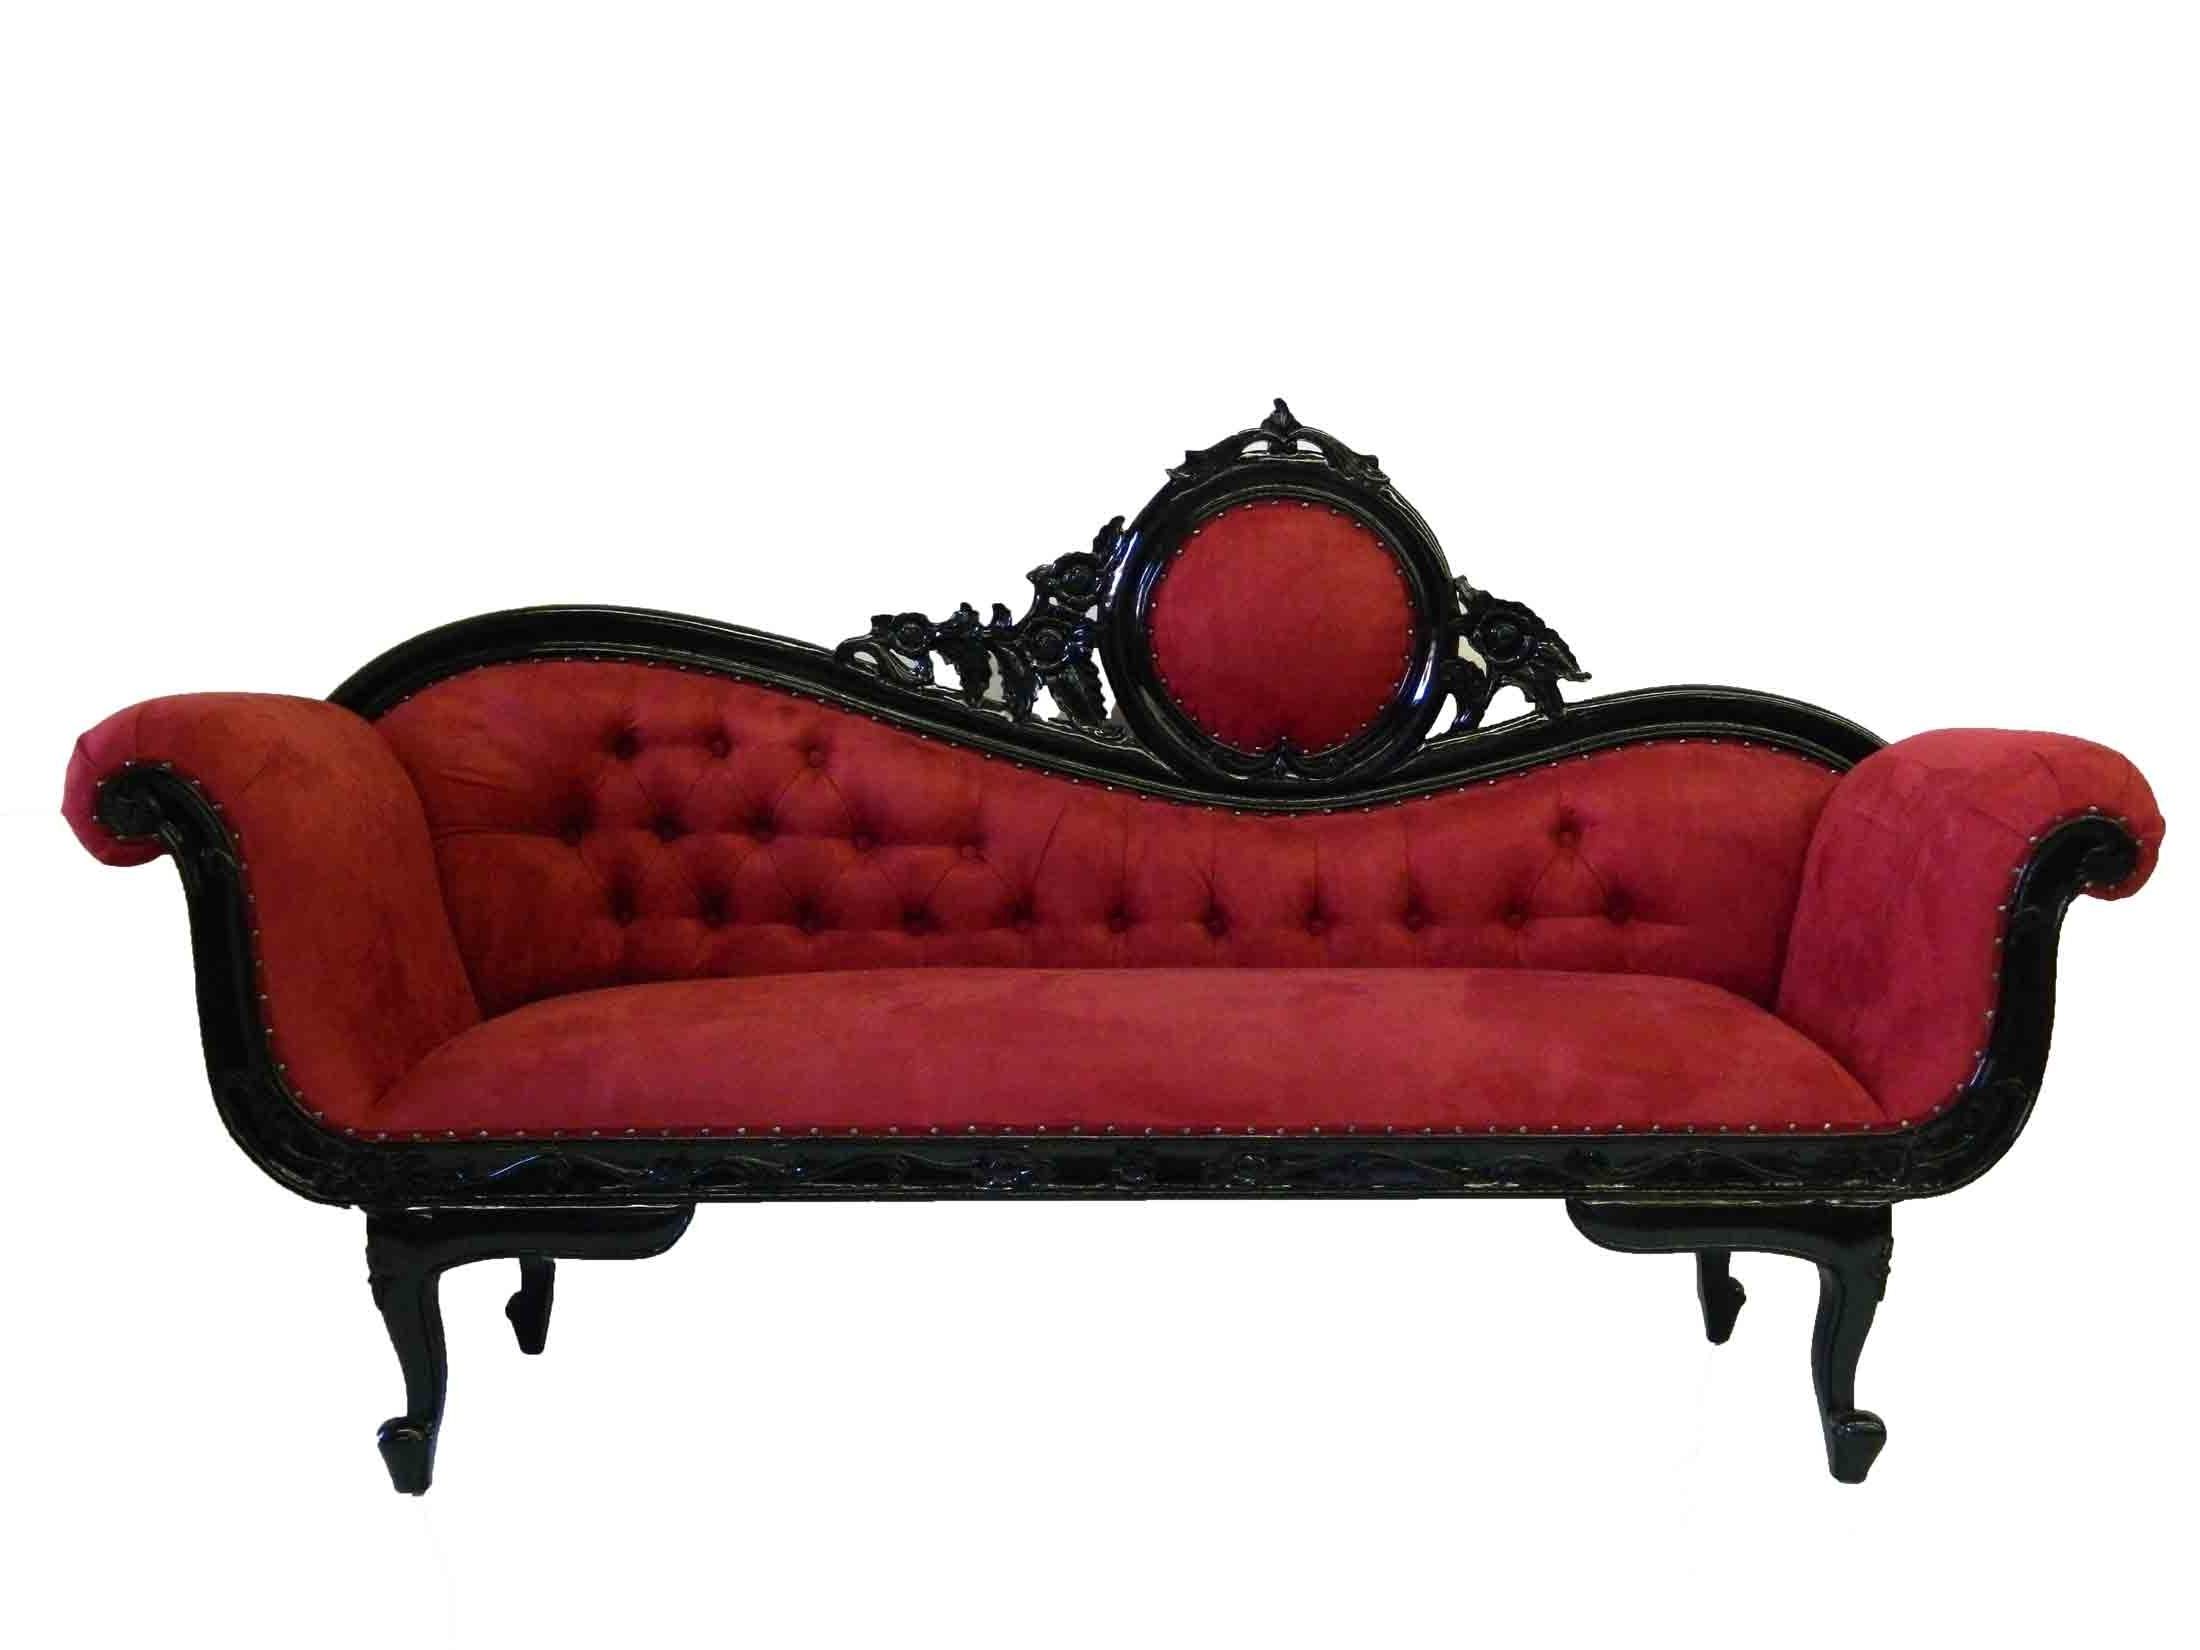 Most Recent Gothic Sofas Inside Black Gothic Furniture, Antique And Gothic Furniatuit On Antique (View 6 of 15)